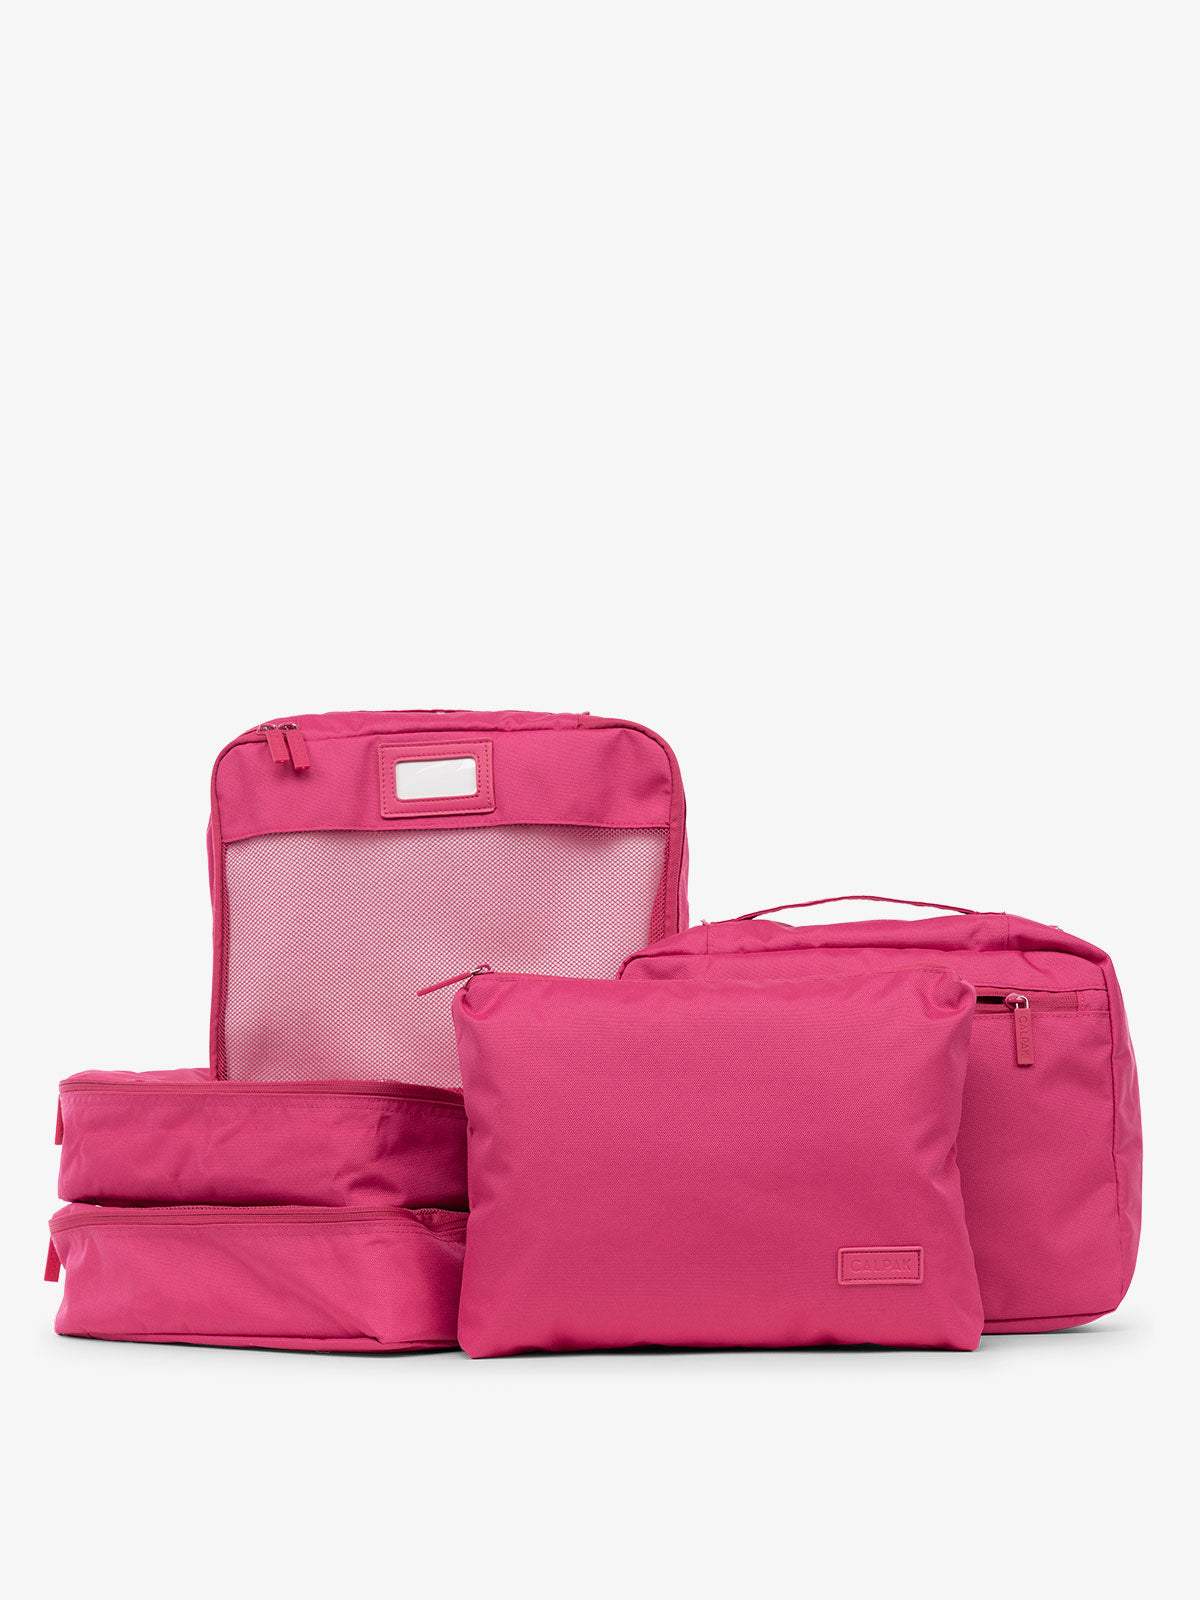 CALPAK 5 piece set packing cubes for travel with labels and top handles in dragonfruit